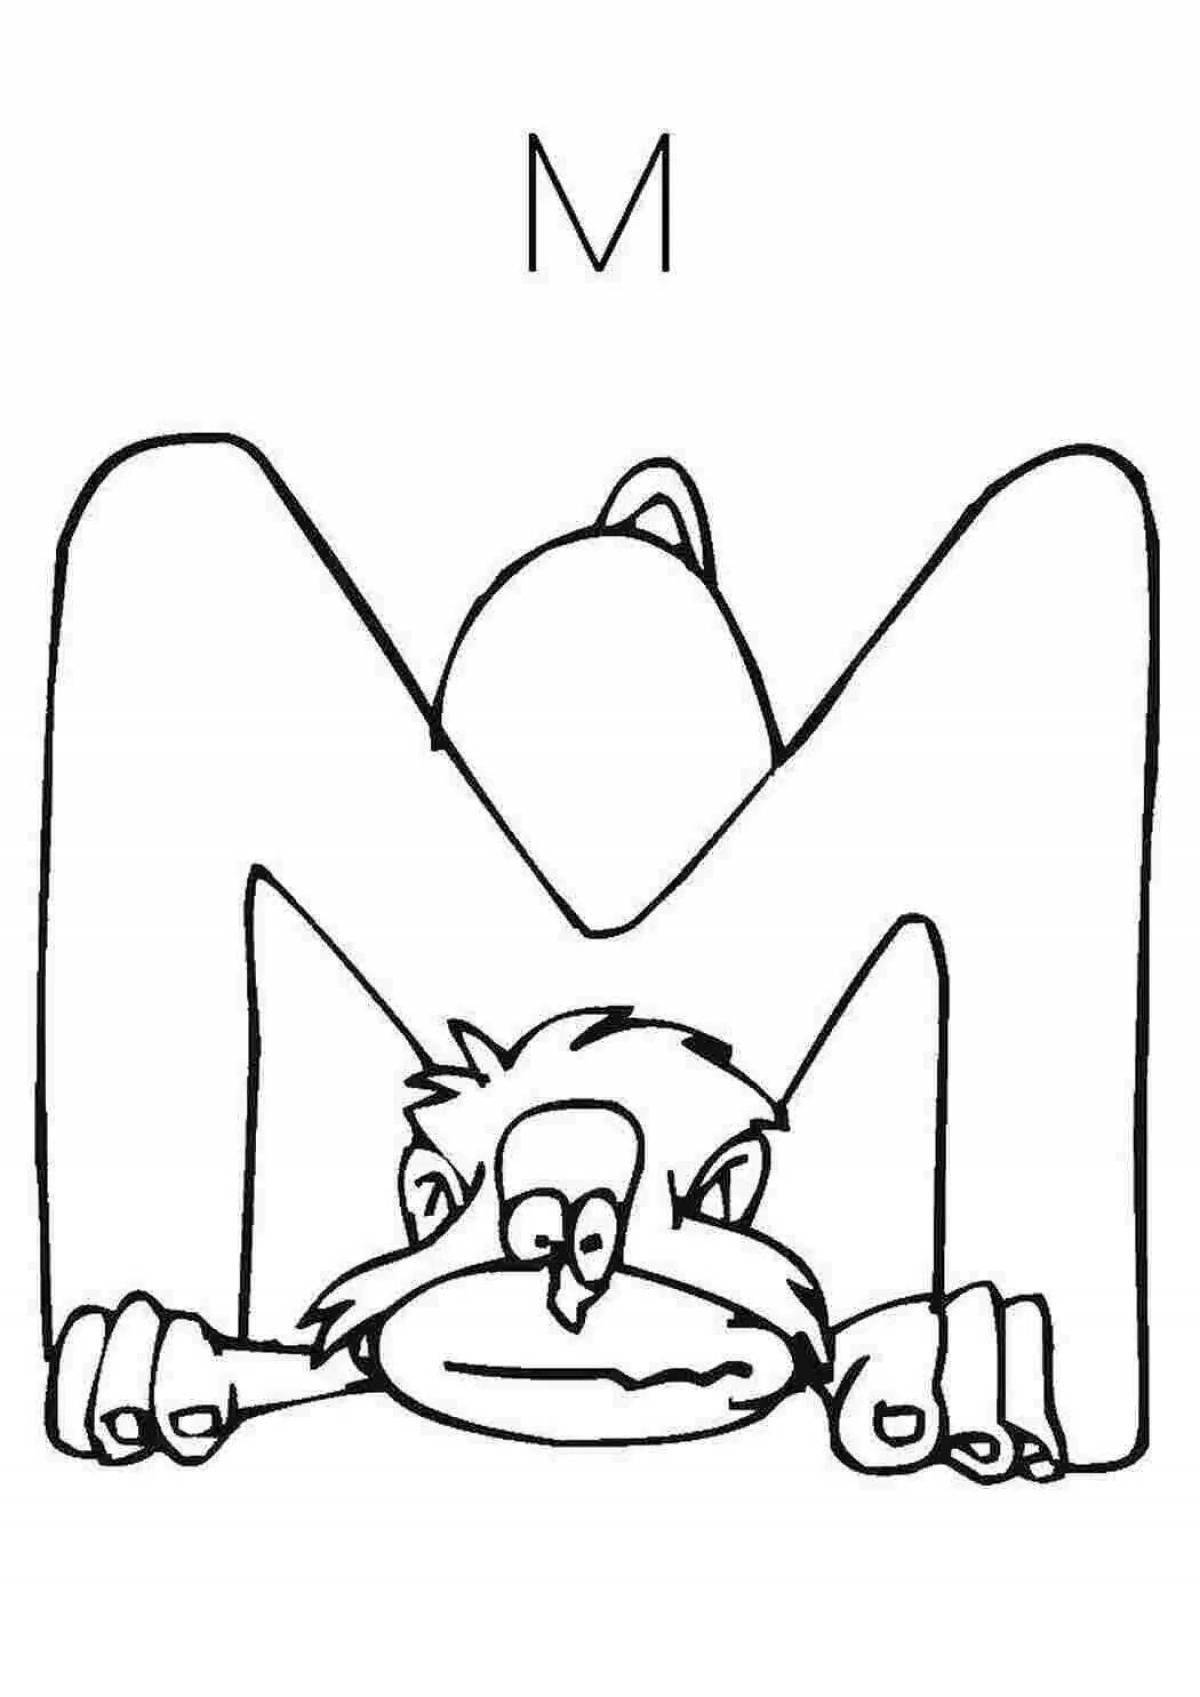 Wacky funny alphabet coloring page